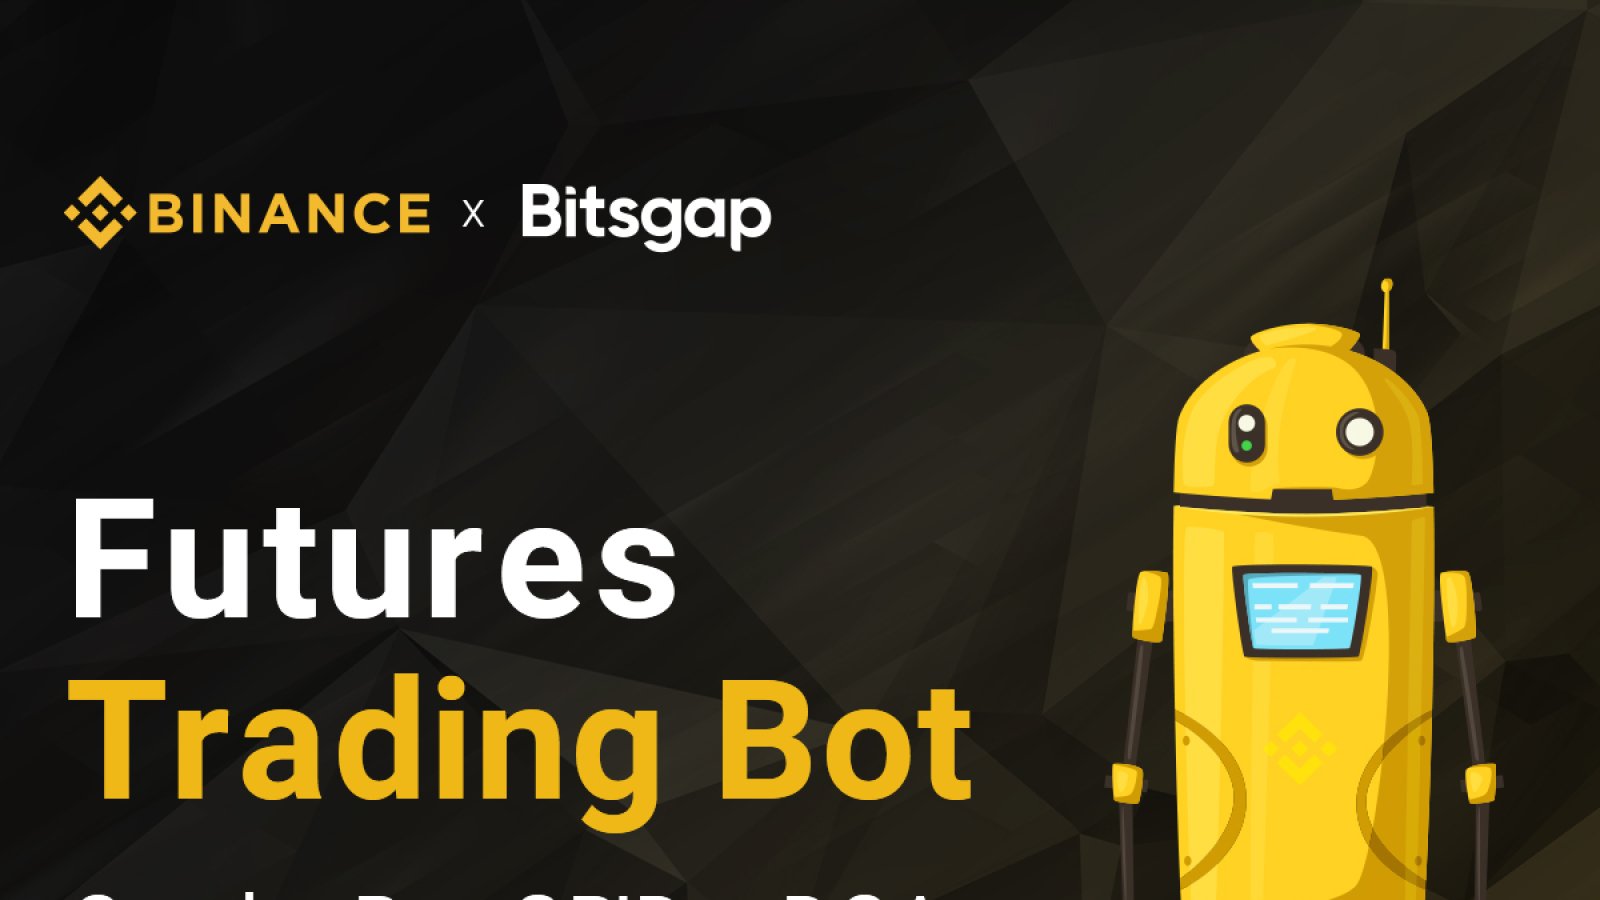 Bitsgap’s New Automated Futures Trading Robot